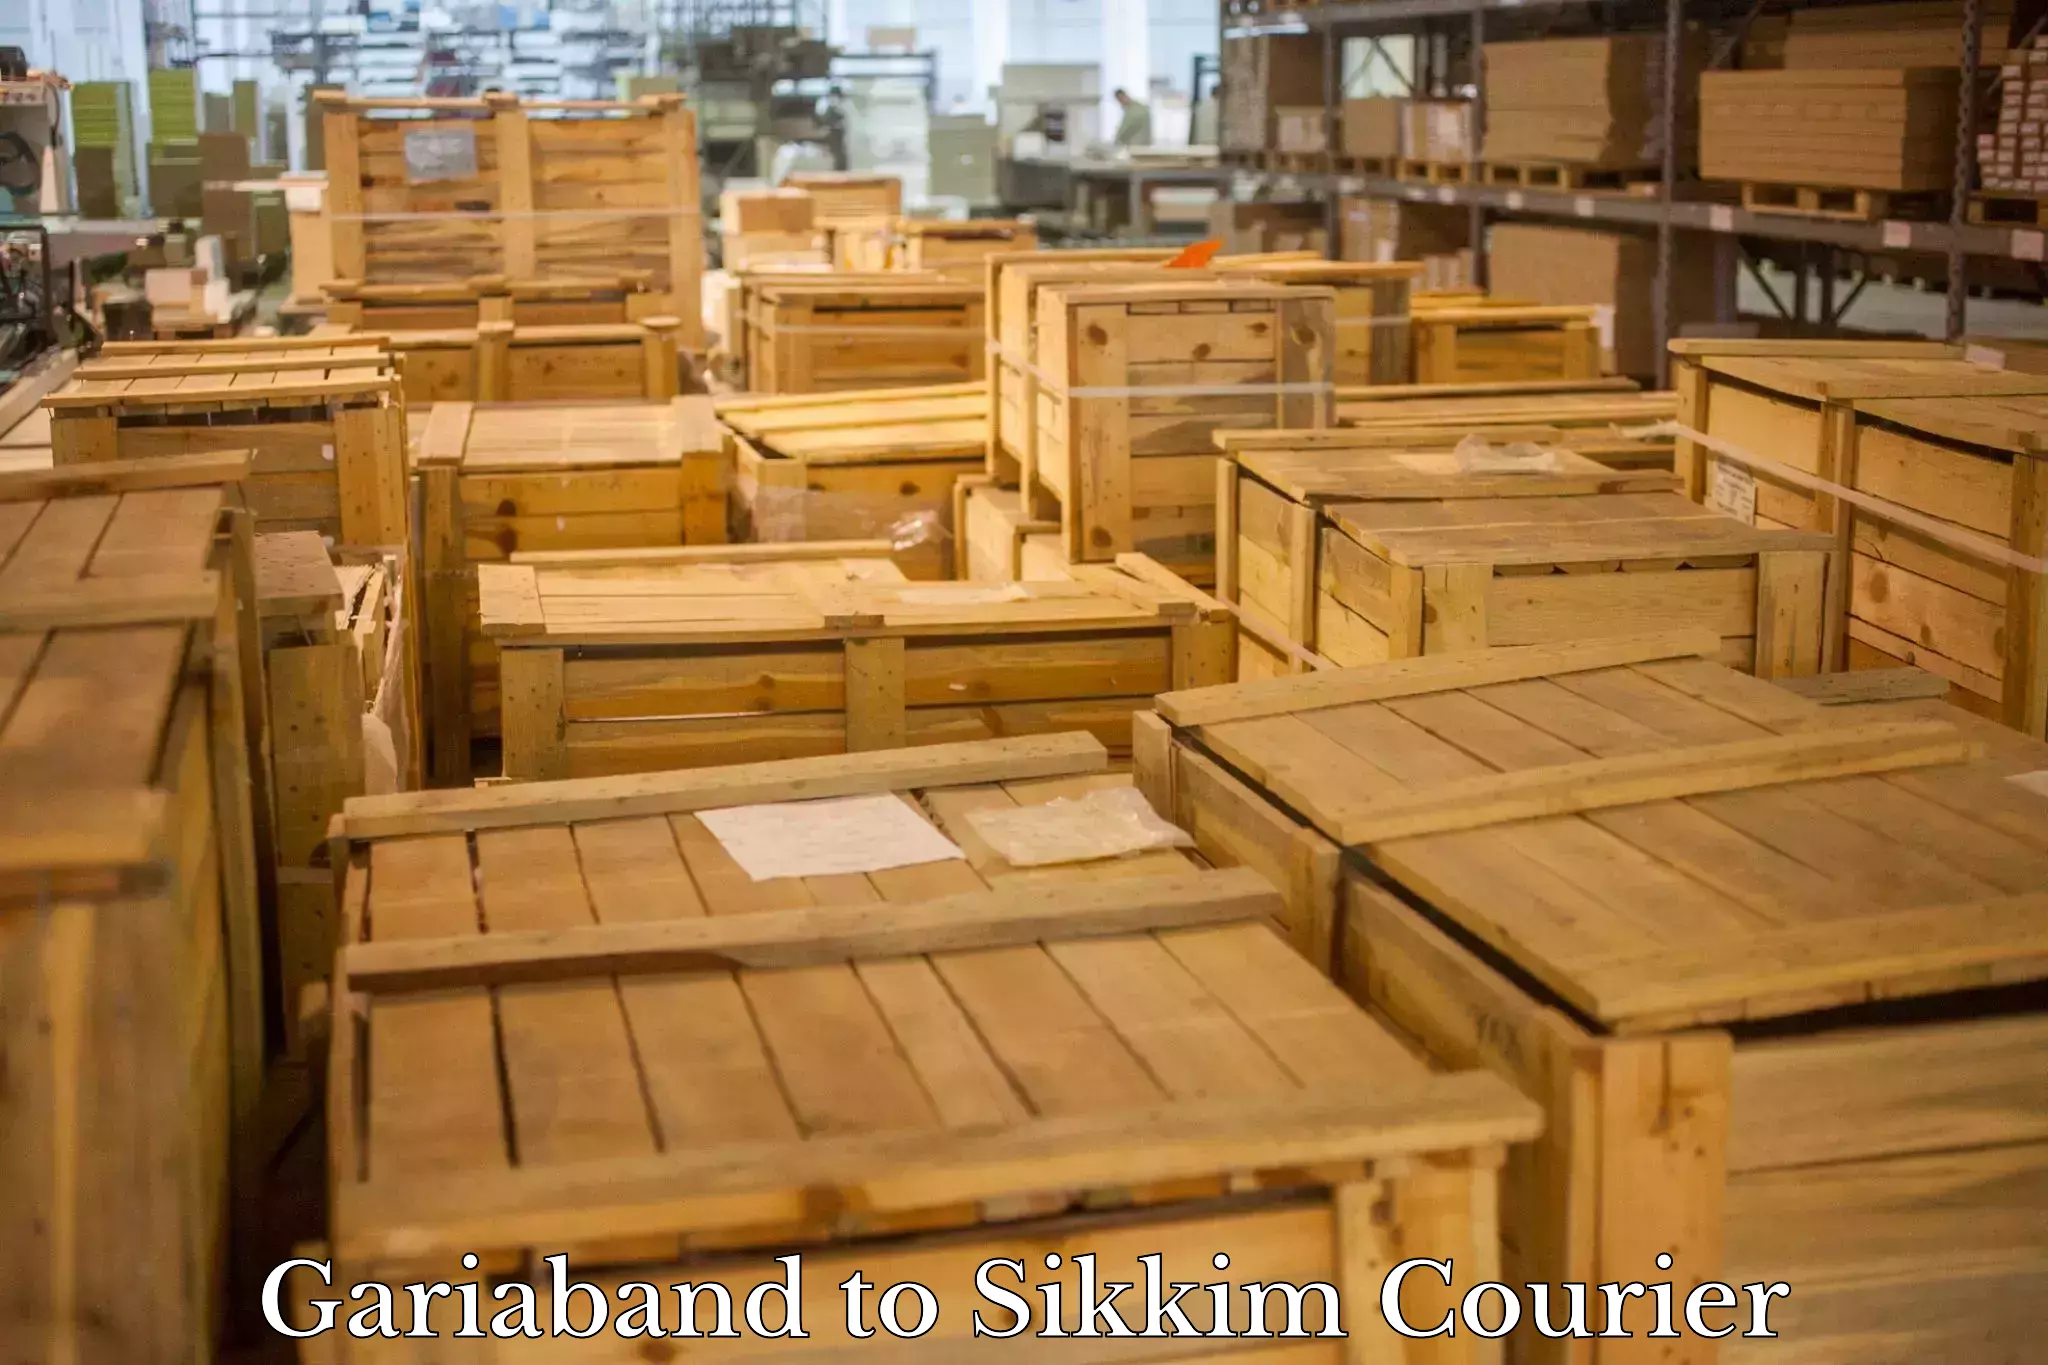 High-efficiency logistics Gariaband to Sikkim